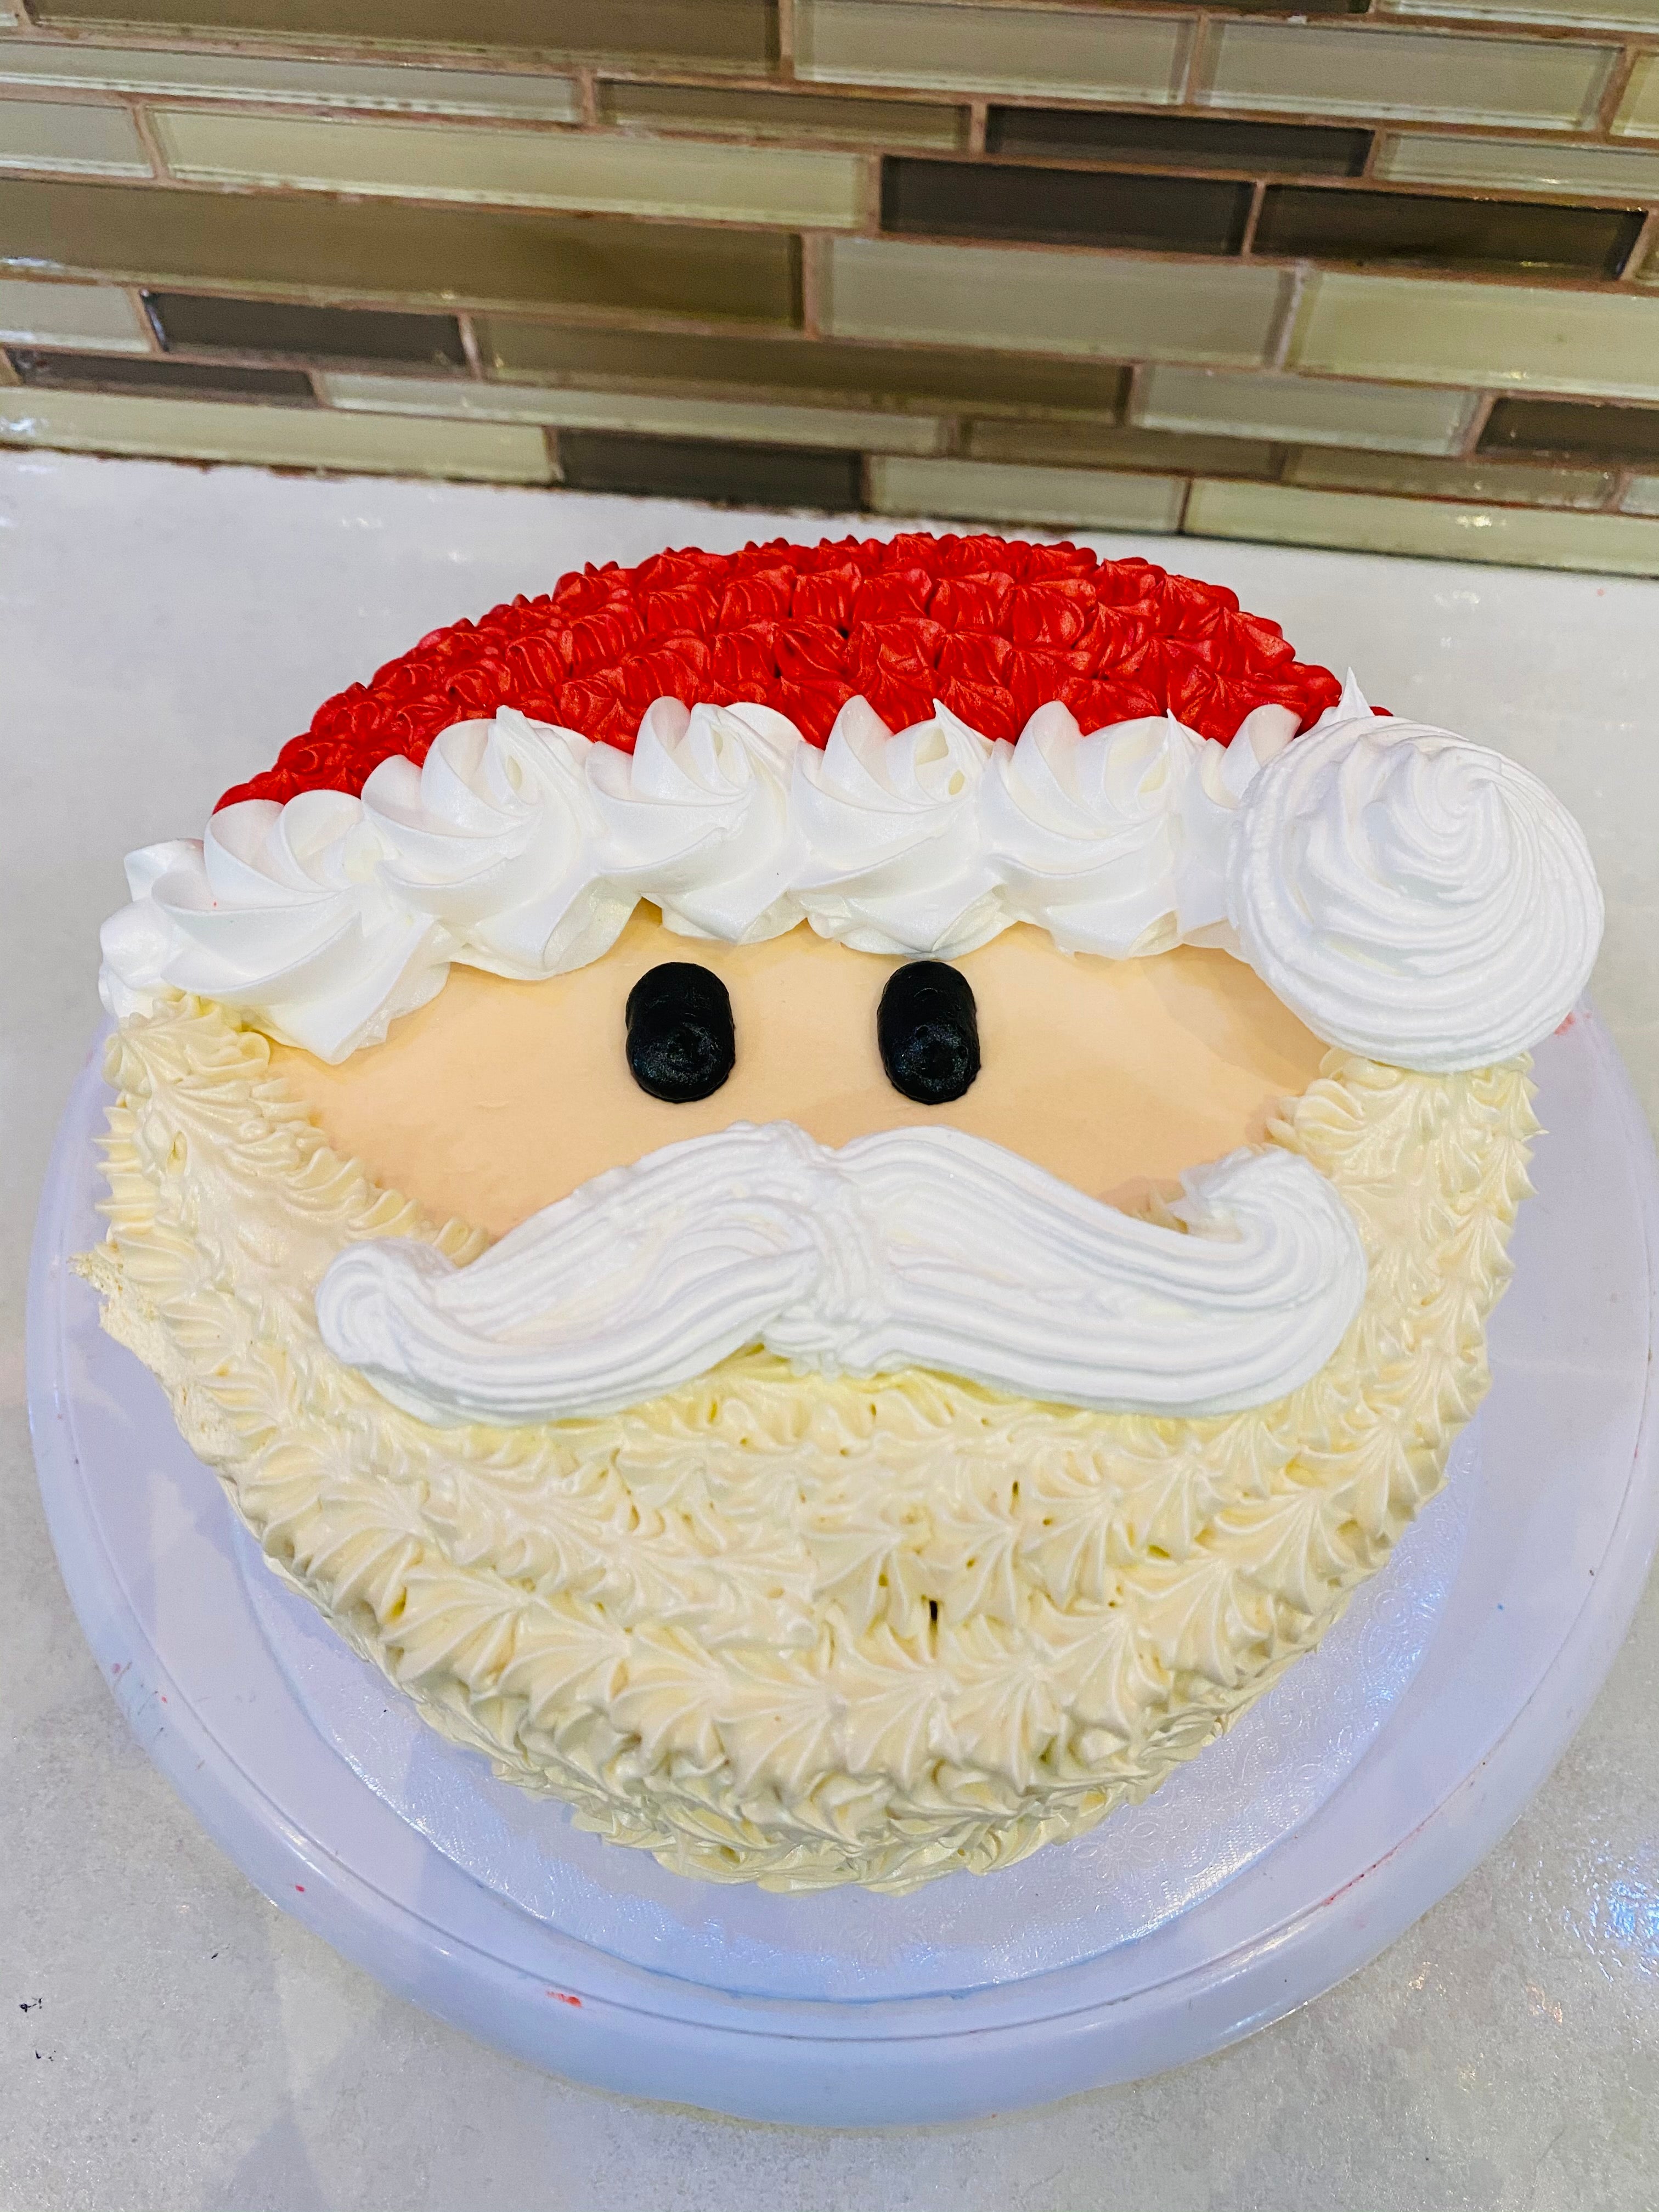 Christmas Cake Toppers Resin Santa Claus Cake Decor Xmas Small House  Cupcake Party Merry Christmas Decor for Home Happy New Year _ - AliExpress  Mobile